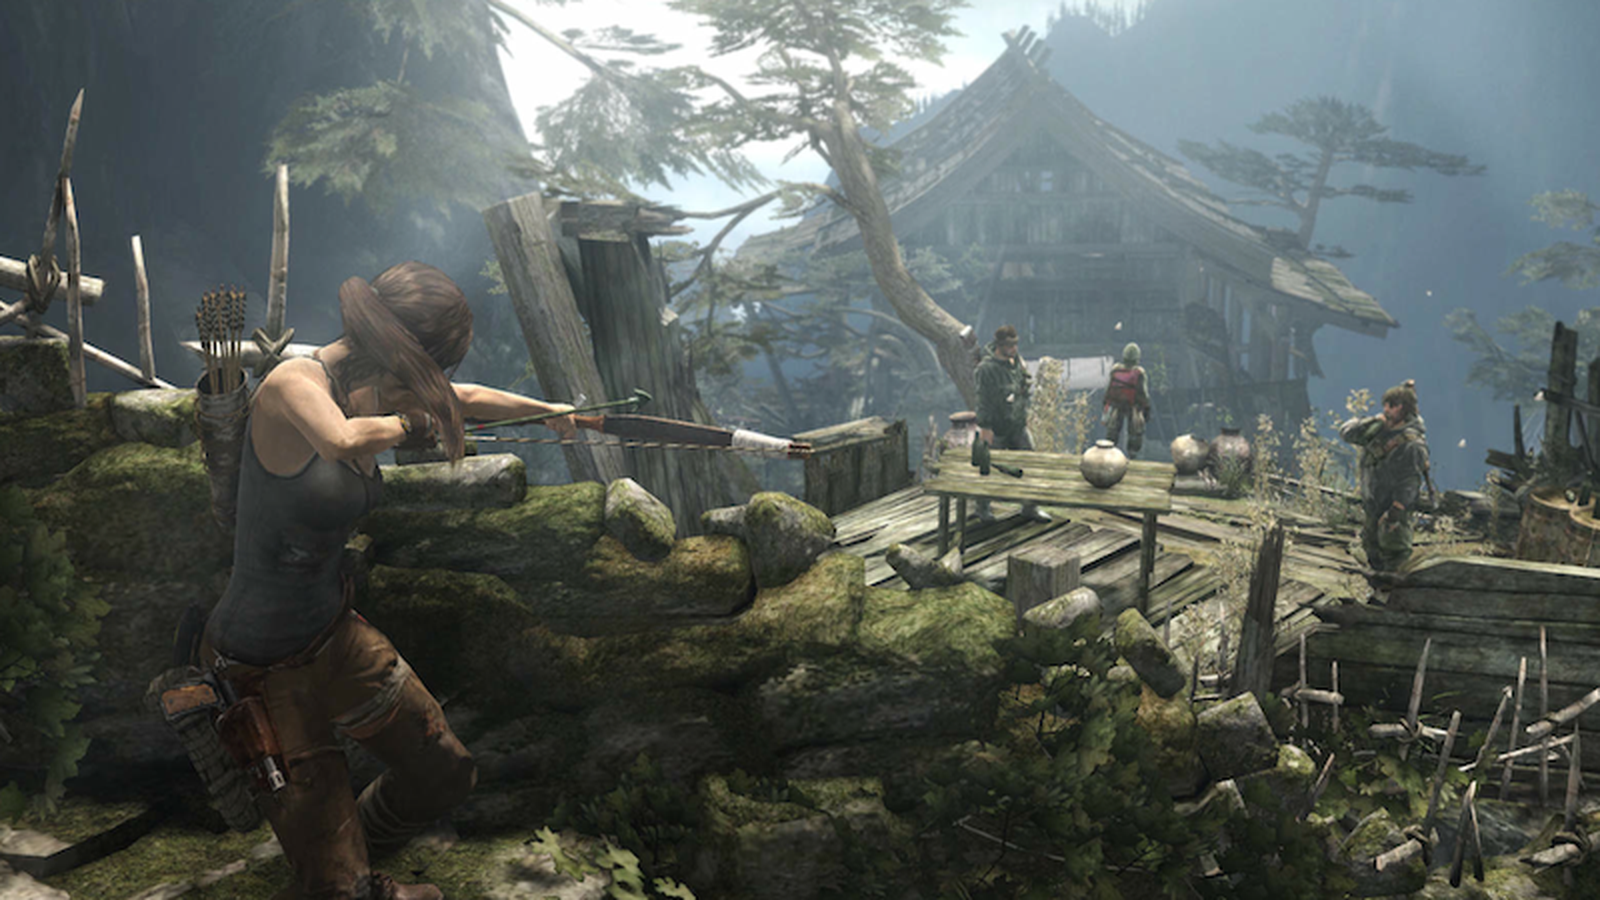 Rise of the Tomb Raider™ on the Mac App Store